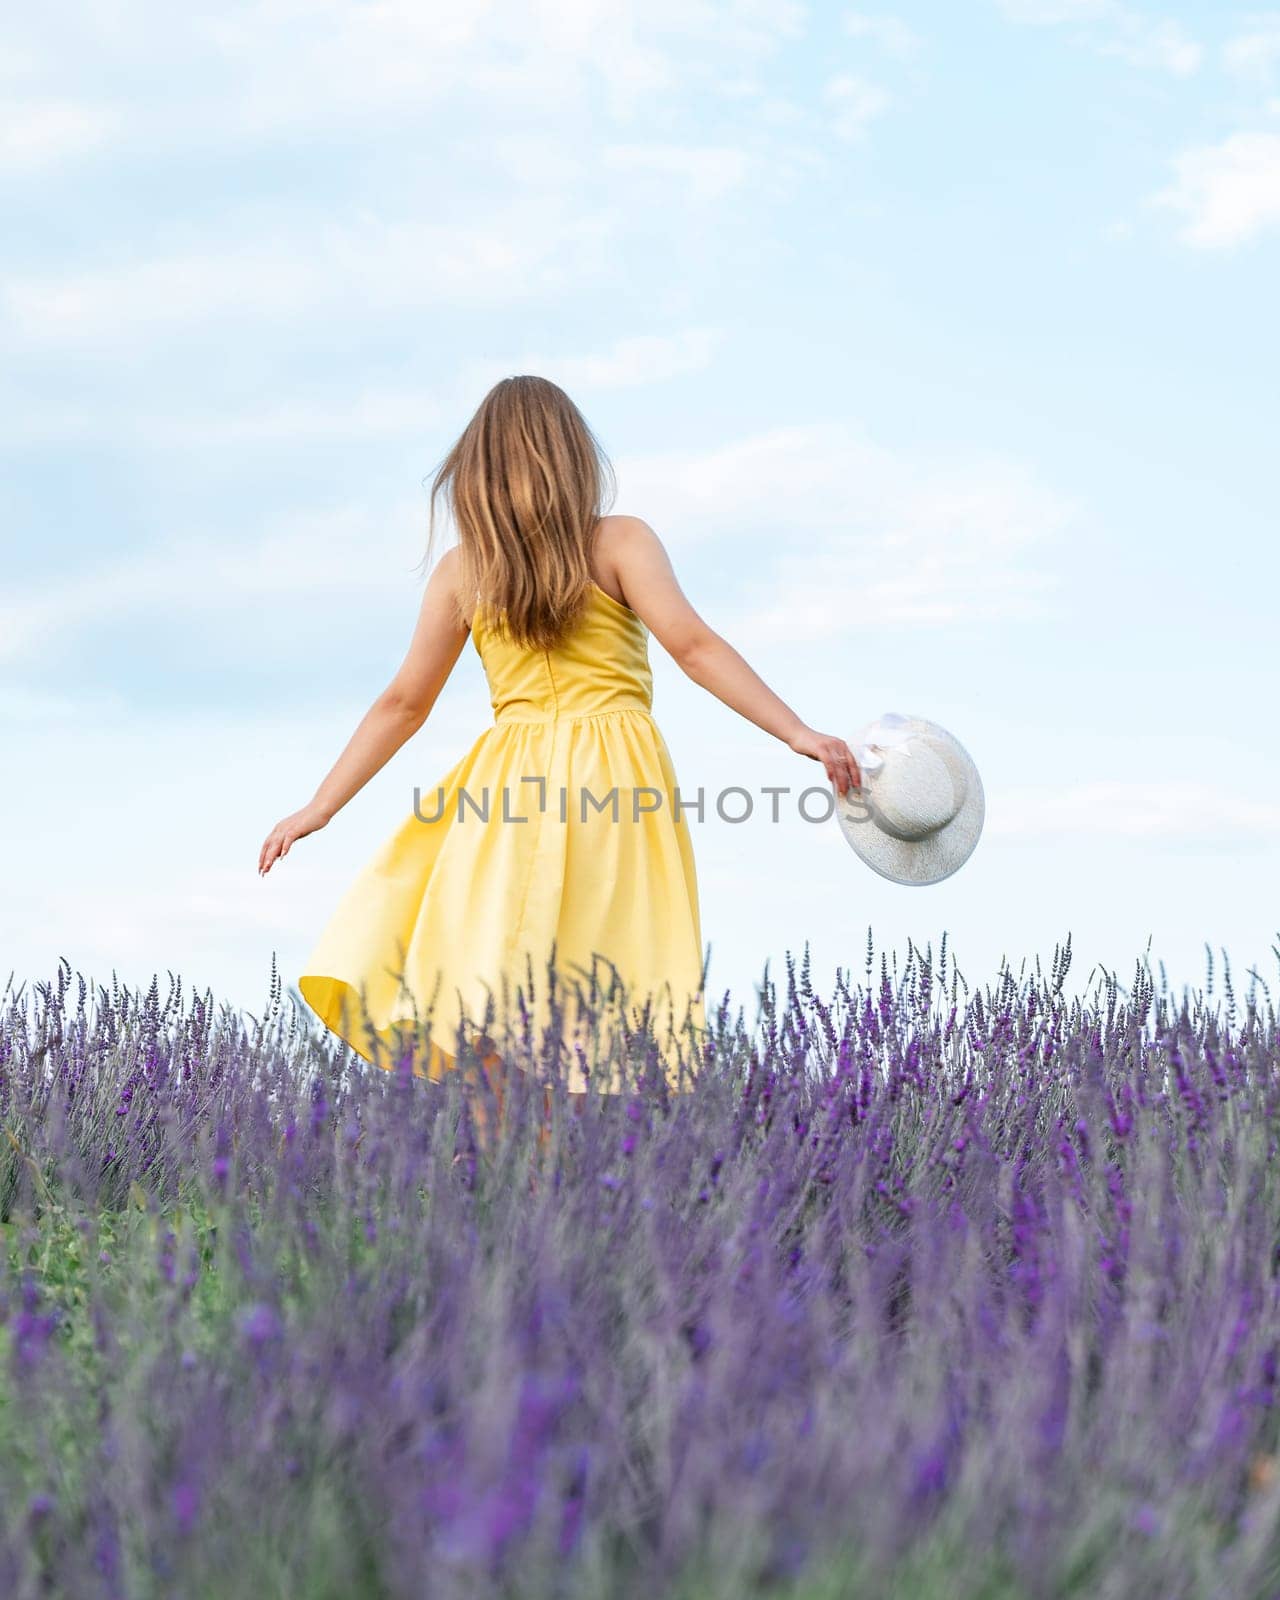 A girl in a yellow dress walks in a lavender field, a young girl between lavender bushes.